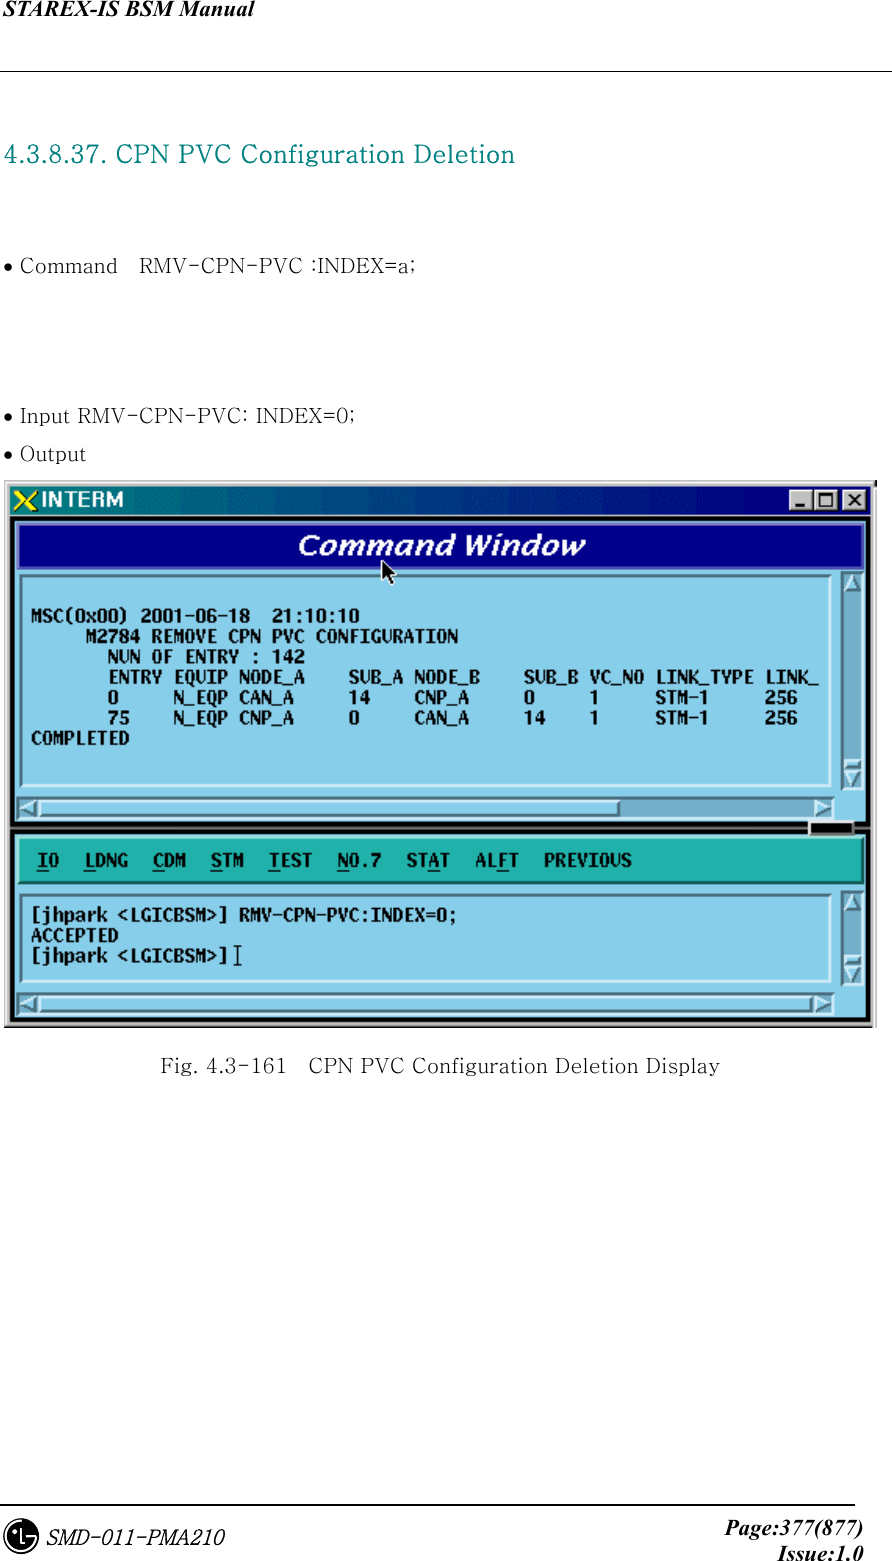 STAREX-IS BSM Manual     Page:377(877)Issue:1.0SMD-011-PMA210  4.3.8.37. CPN PVC Configuration Deletion    • Command    RMV-CPN-PVC :INDEX=a;    • Input RMV-CPN-PVC: INDEX=0; • Output  Fig. 4.3-161    CPN PVC Configuration Deletion Display